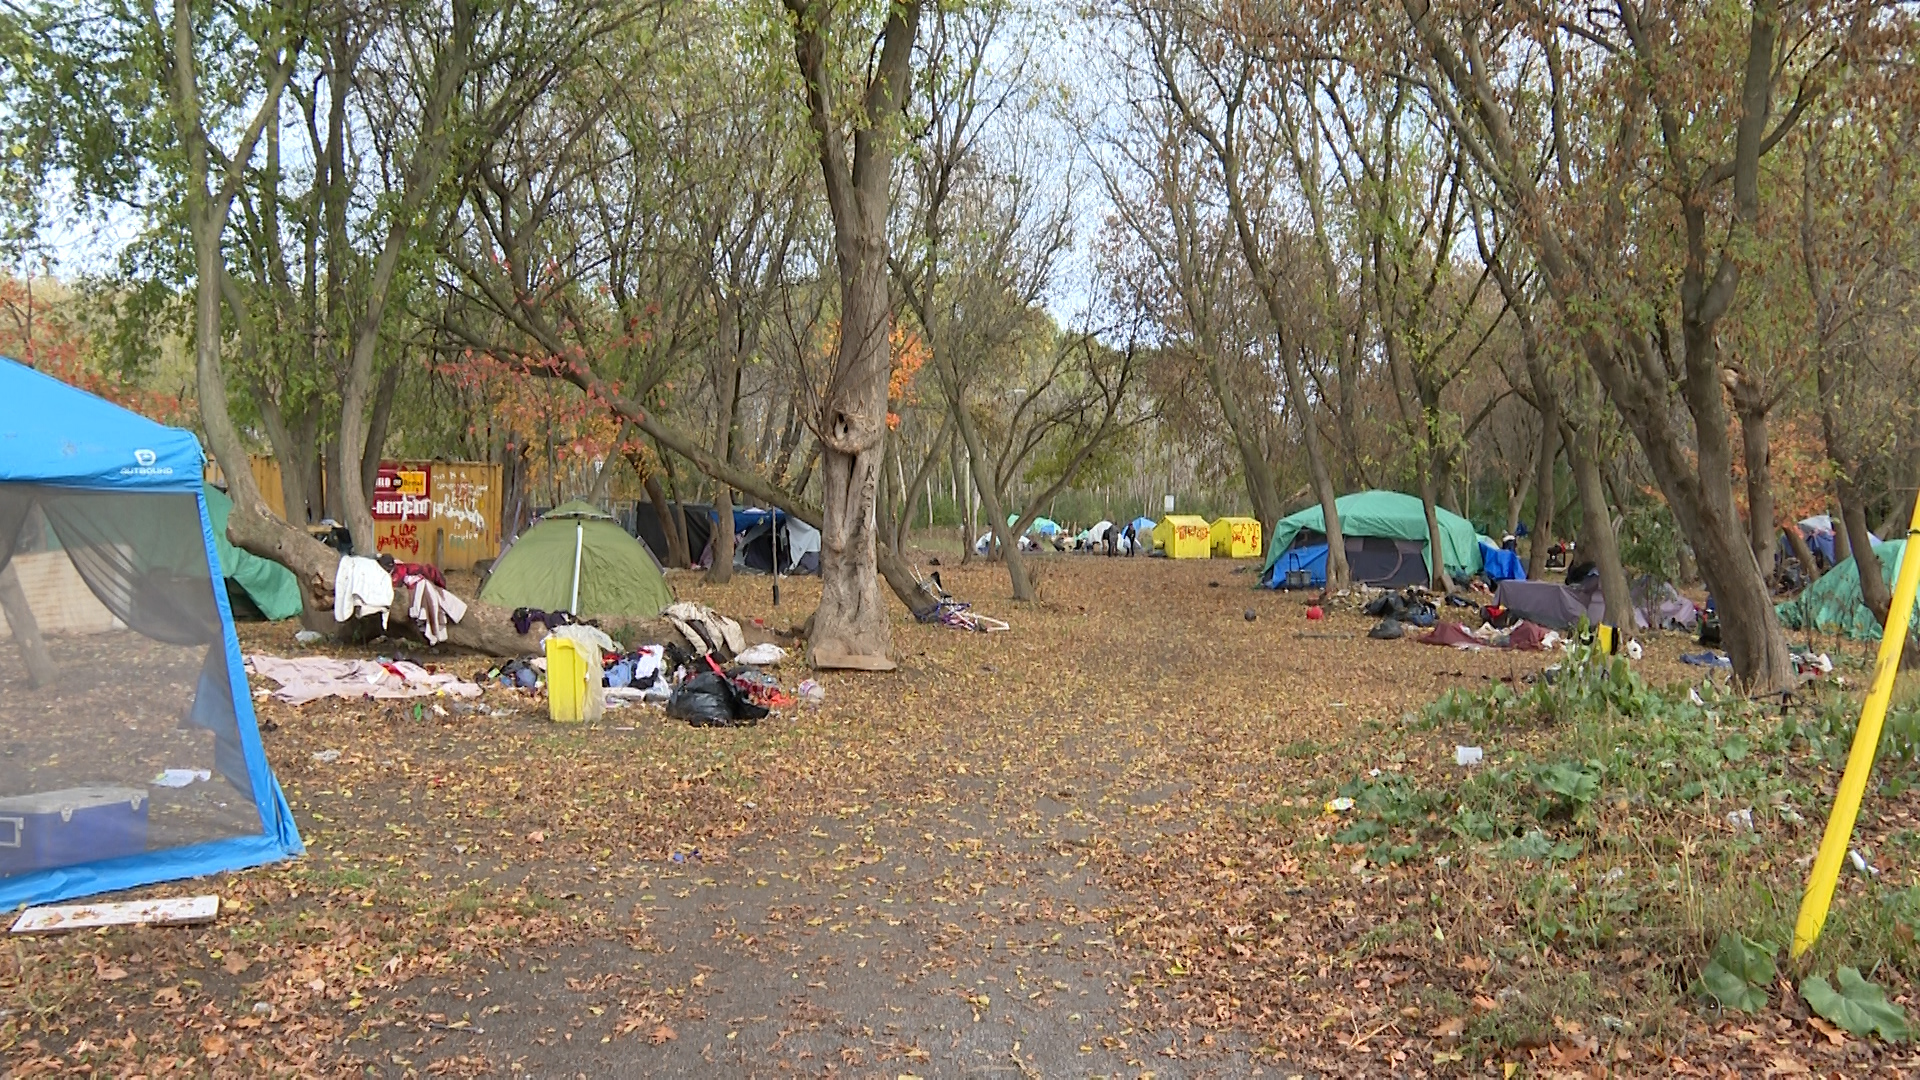 As Kingston continues eviction push, Belle Park encampment lawyers state their case